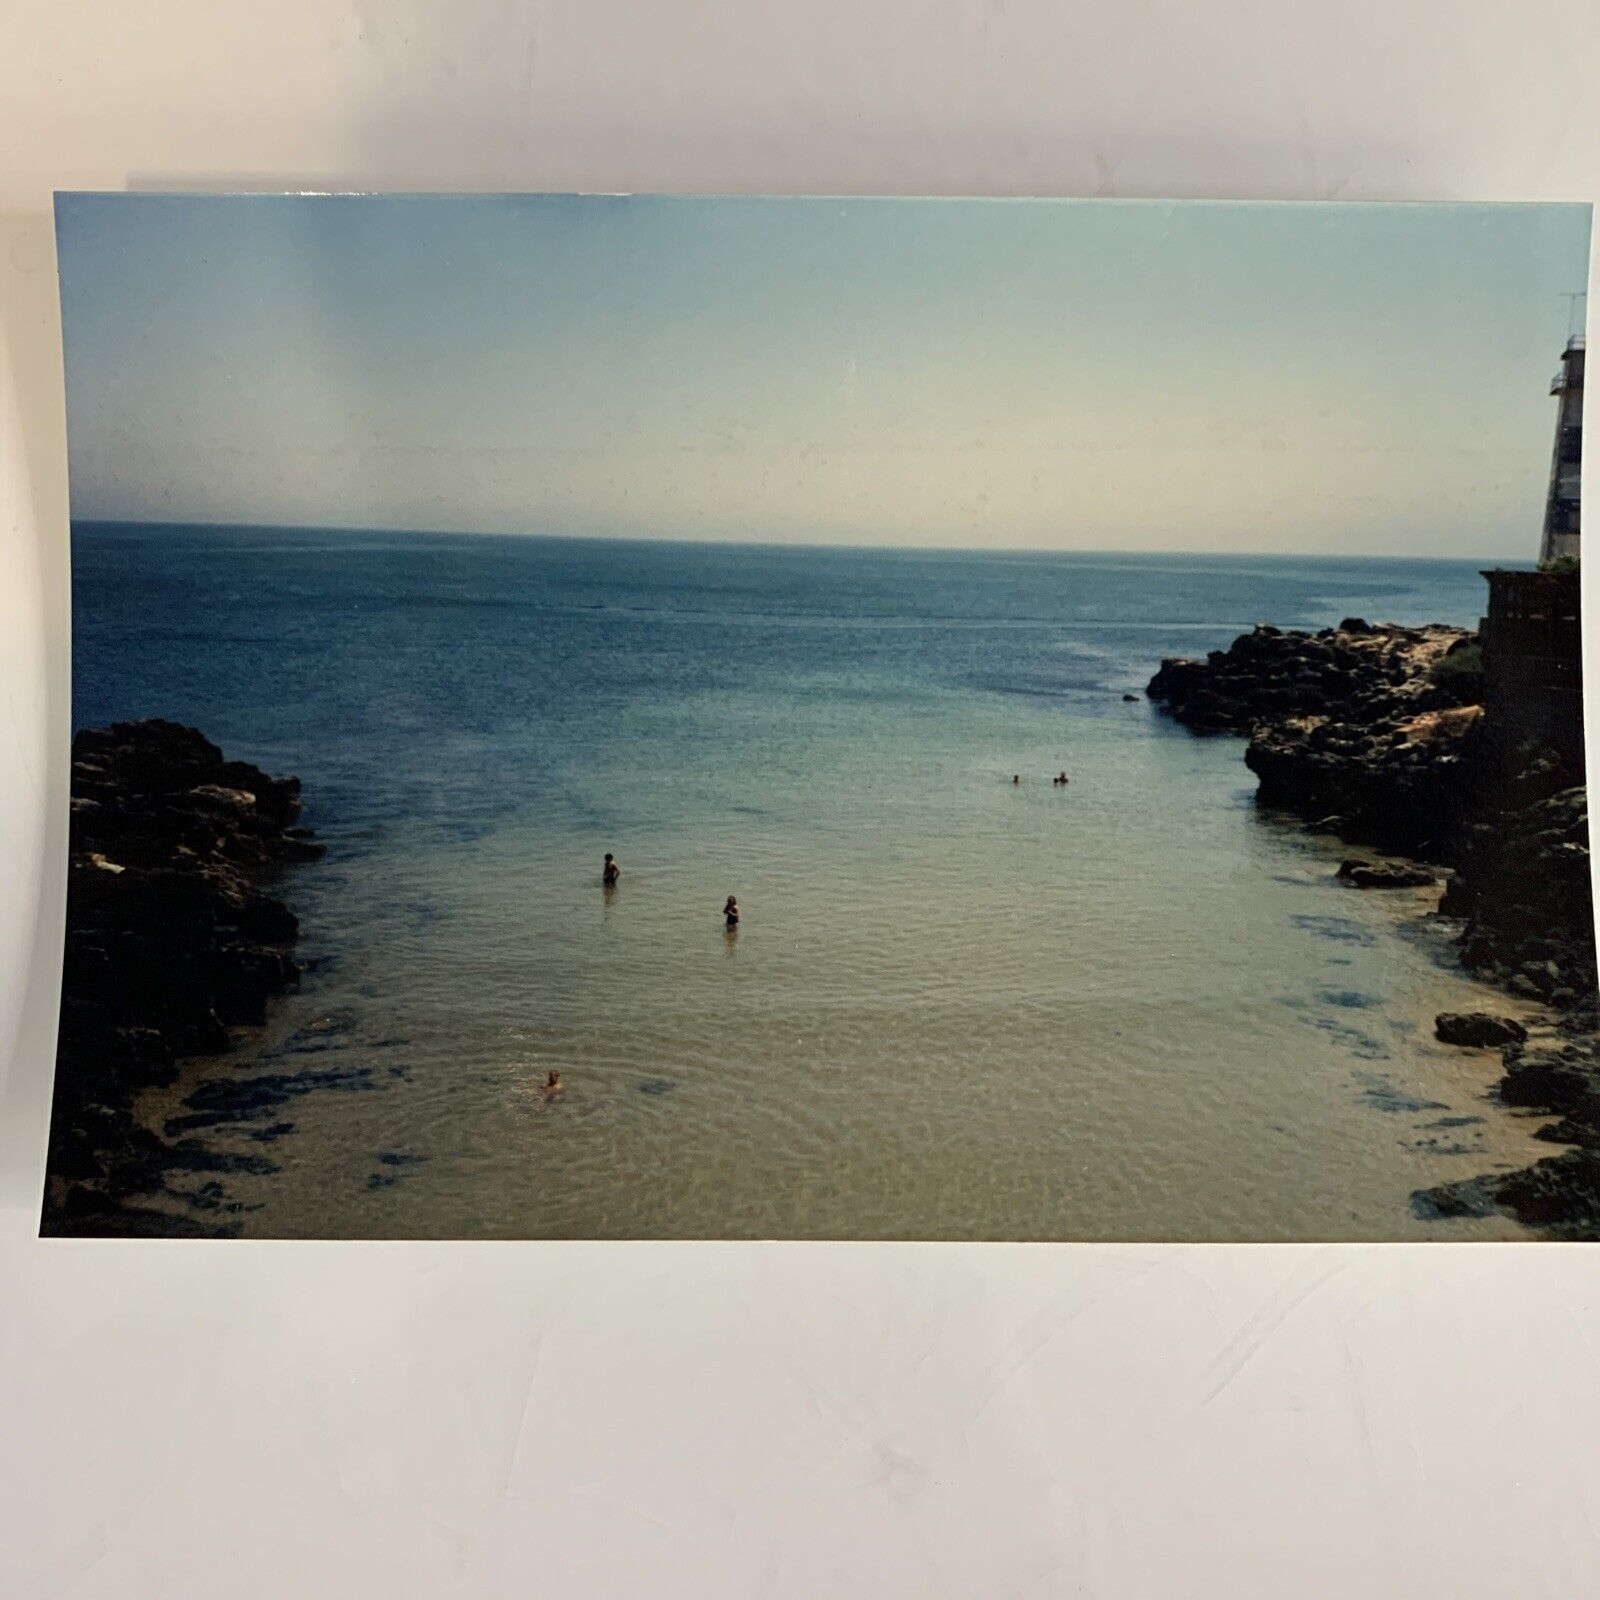 Ocean Shore Water International Travel Color Vintage Photograph Real Photo